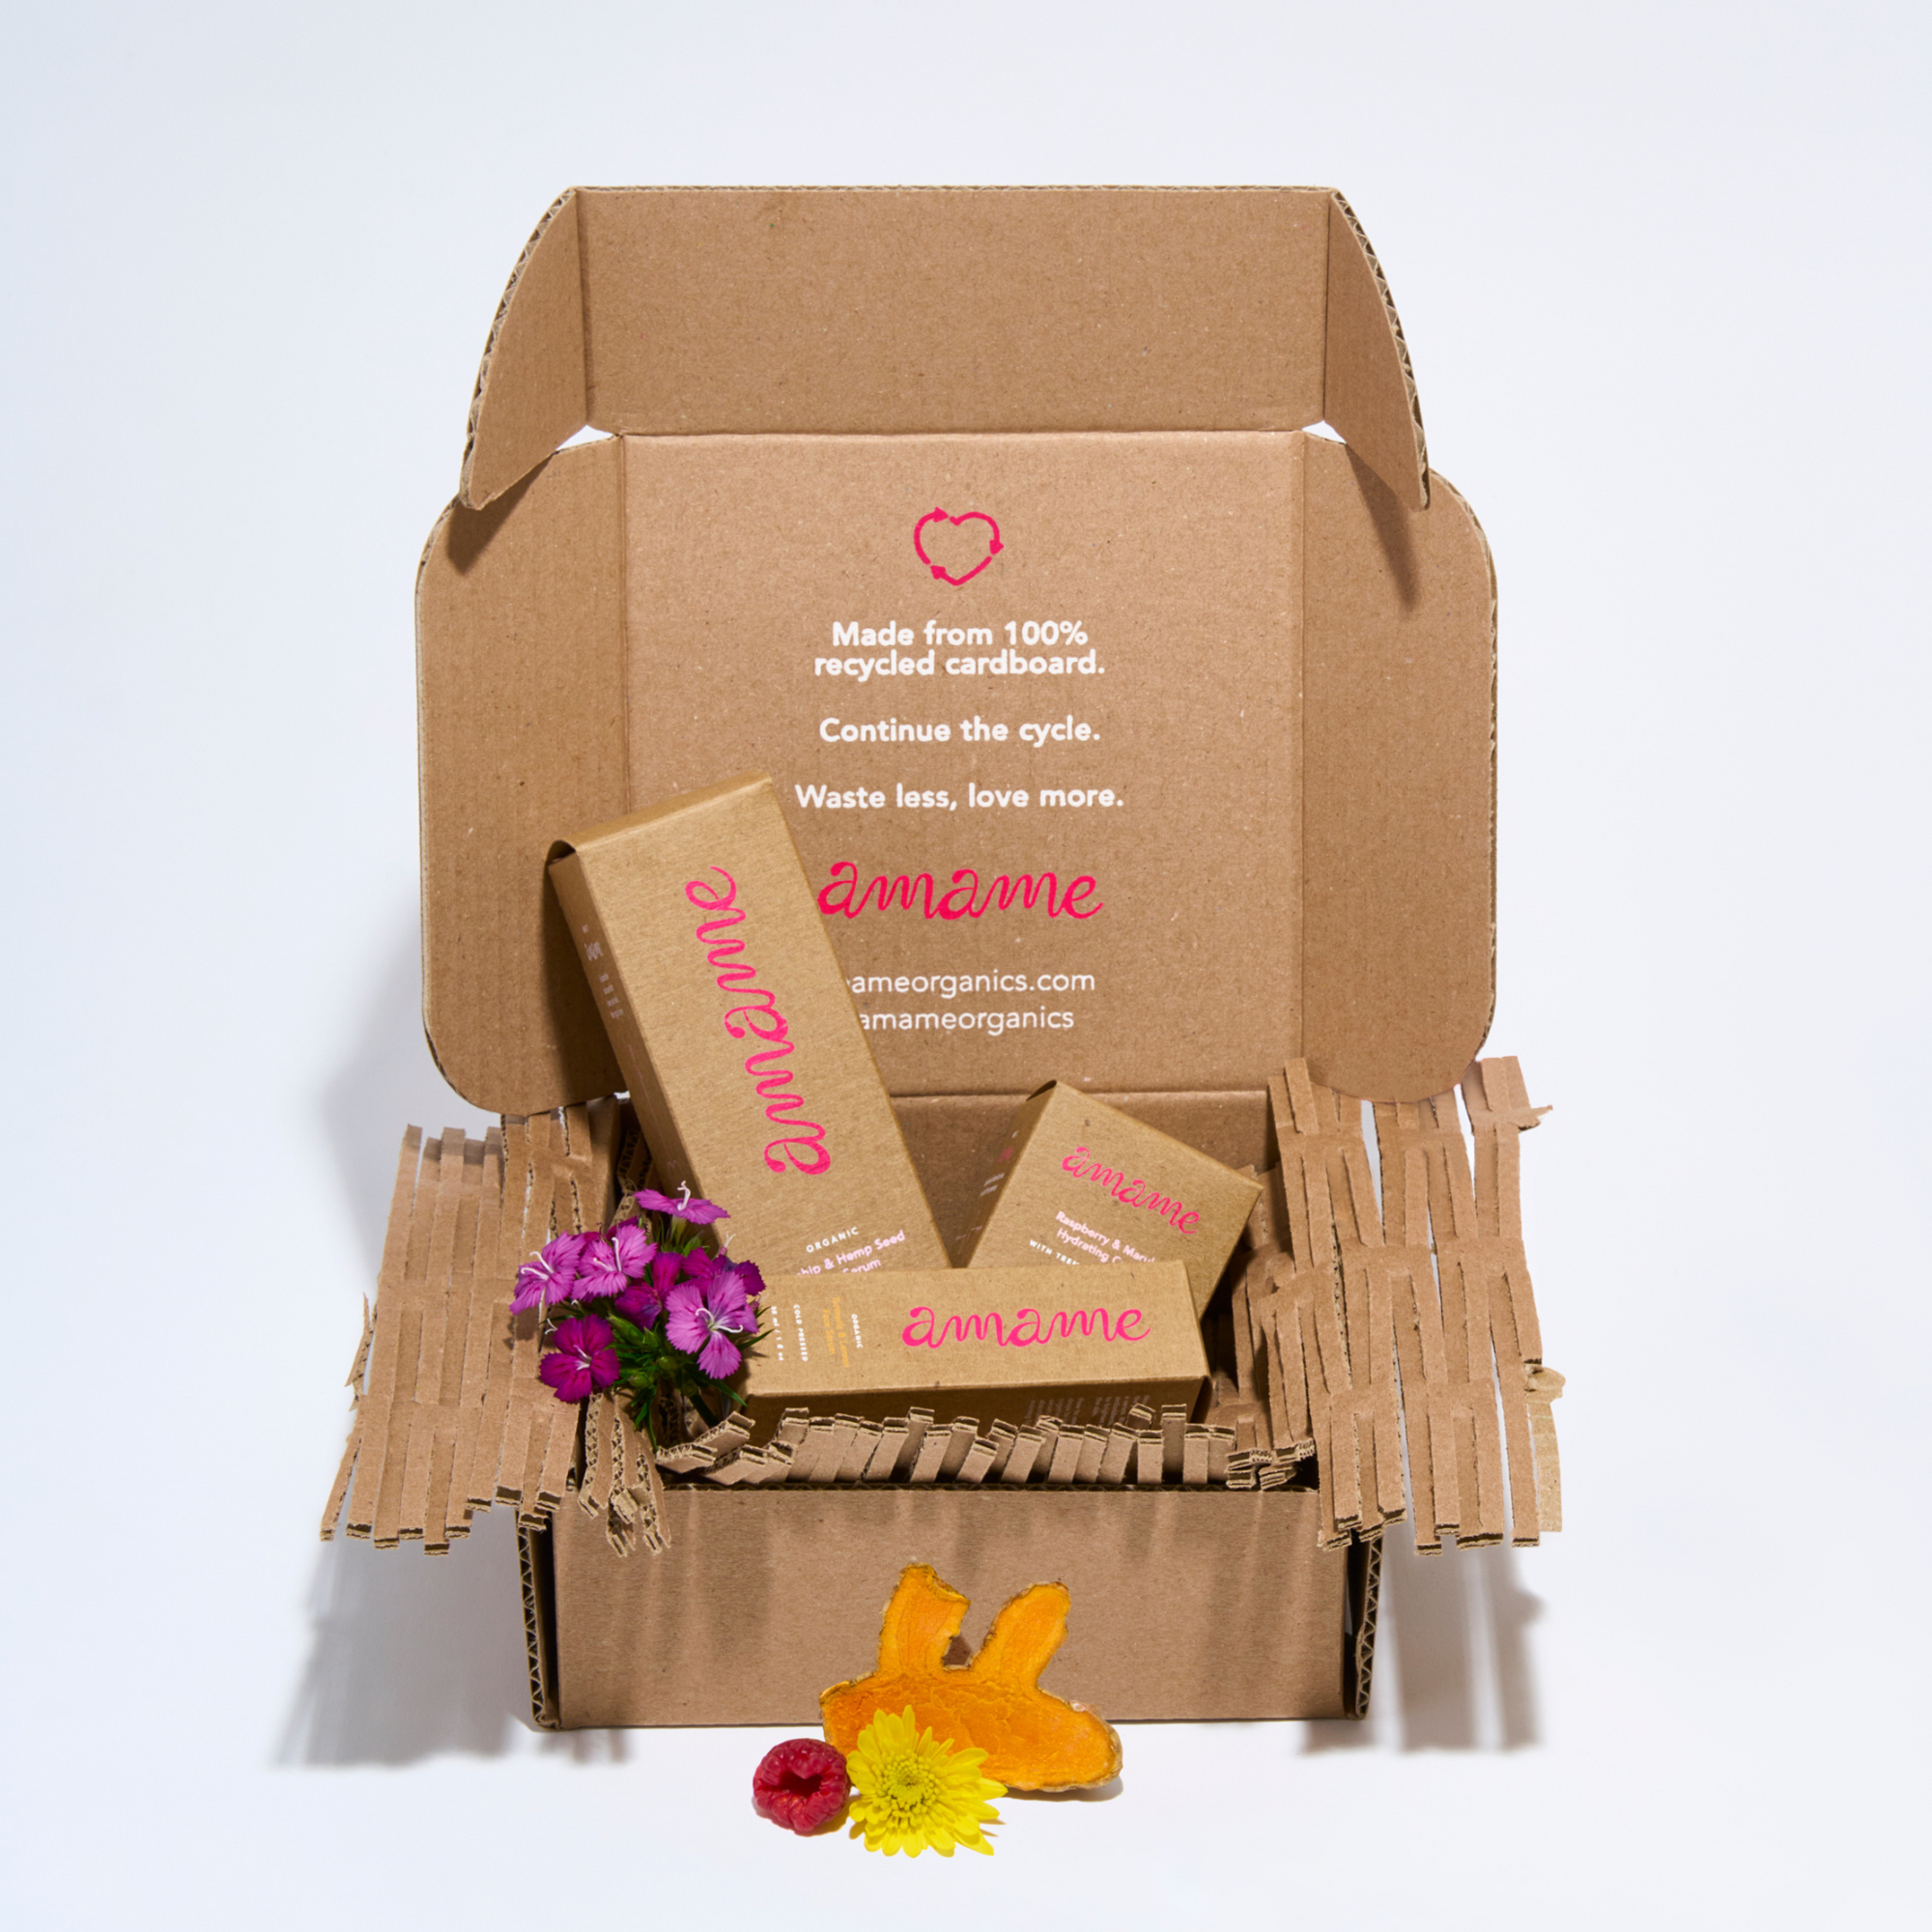 All of our retail boxes, packing materials, and shipping boxes, are made of 100% post-recycled waste (95% post-consumer), fully recyclable, and naturally biodegradable.